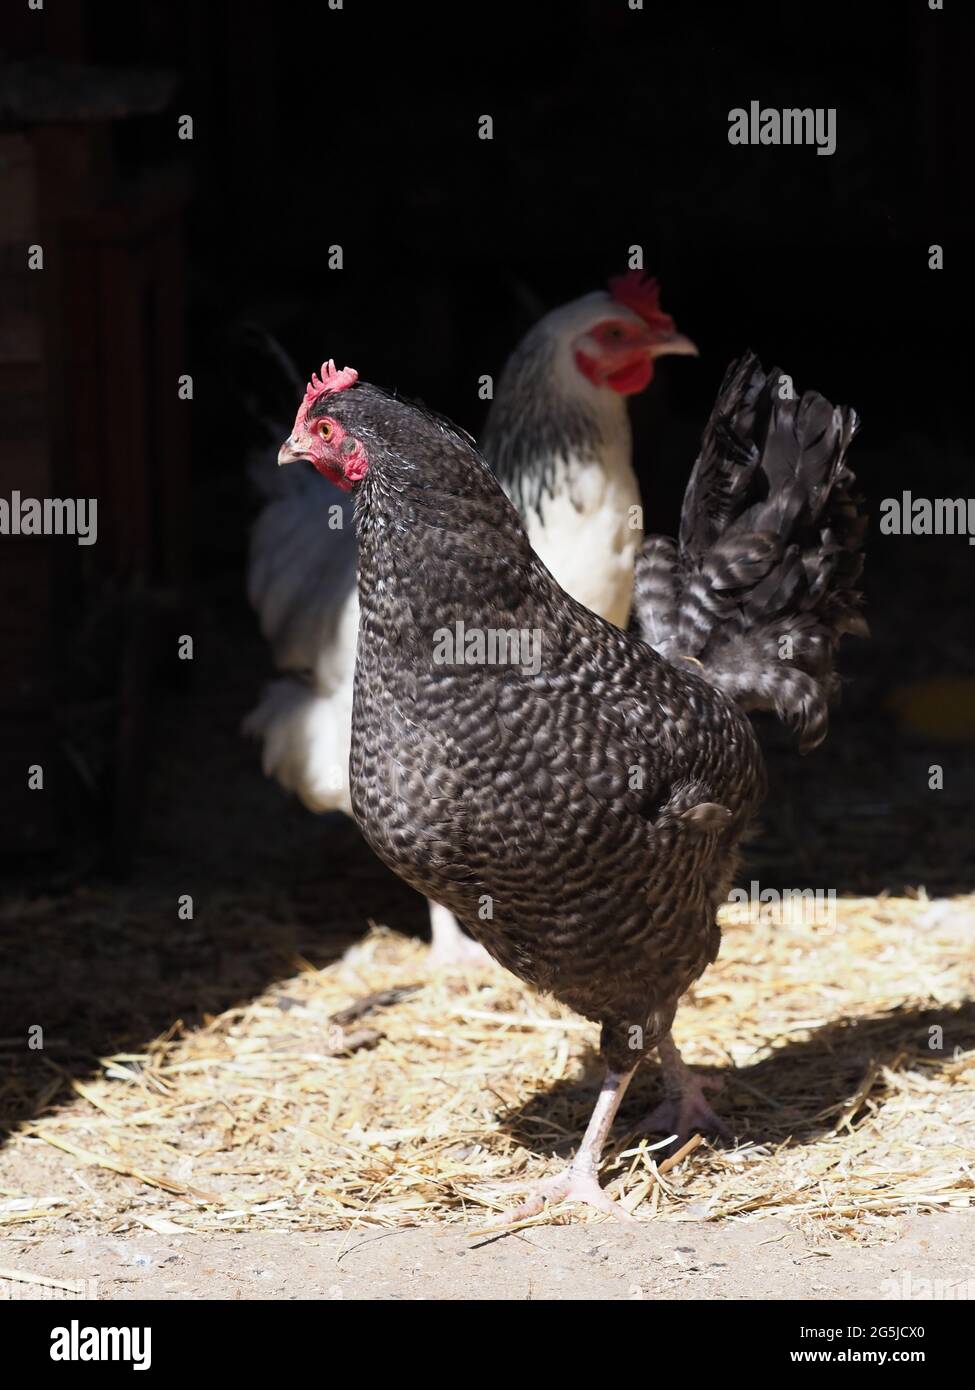 A rare breed hen against a black background. Stock Photo